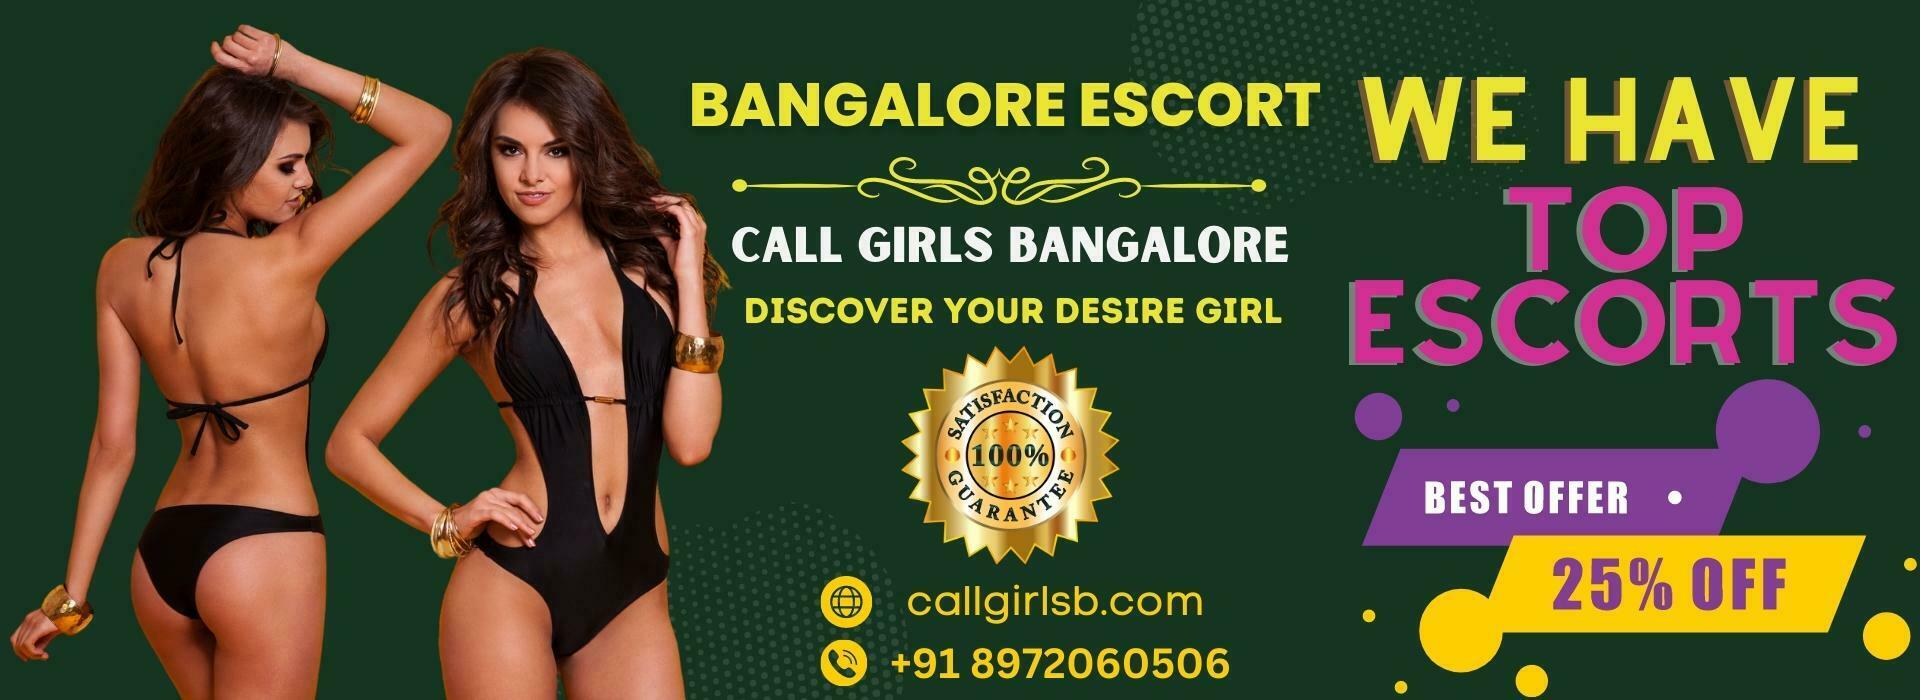 verified escort service, sexy girls, vip escort model in banglore, contact, privacy policy, Bangalore escort service independent call girls, female escort in bangalore, independent escort girls, escort girl in bangalore, call girl in bangalore, female escorts in bangalore, escort service bangalore, high profile model, escort girl phone number, escort mobile number, call girl phone number, best escort service in banglore, best escort girl in banglore, female escort, independent escort, vip escorts, high profile call girl, high class call girl, high class girl, dating escort service, dating apps, dating site, premium escort, premium call girl, call girls, independence home girl, home escort, dating service, VIP escort service, chatting call girl, locanto call girl, locanto call girl, locanto escort, locanto escort girl, Body to body, full body massage, body massage, sensual massage, lingam massage, female to male, happy ending massage, tantric massage, erotic massage, massage spa, spa massage, ladies parlor, ladies parlor near me, massage near me, massage spa near me, spa massage near me, b2b massage, b2b massage near me, body to body spa near me, spa near me, b2b spa, b2b spa near me, female to male spa near me, female to male spa, female to male massage, massage parlor near me, massage parlor, body massage, body massage near me, massage center near me, massage center, russian escort,